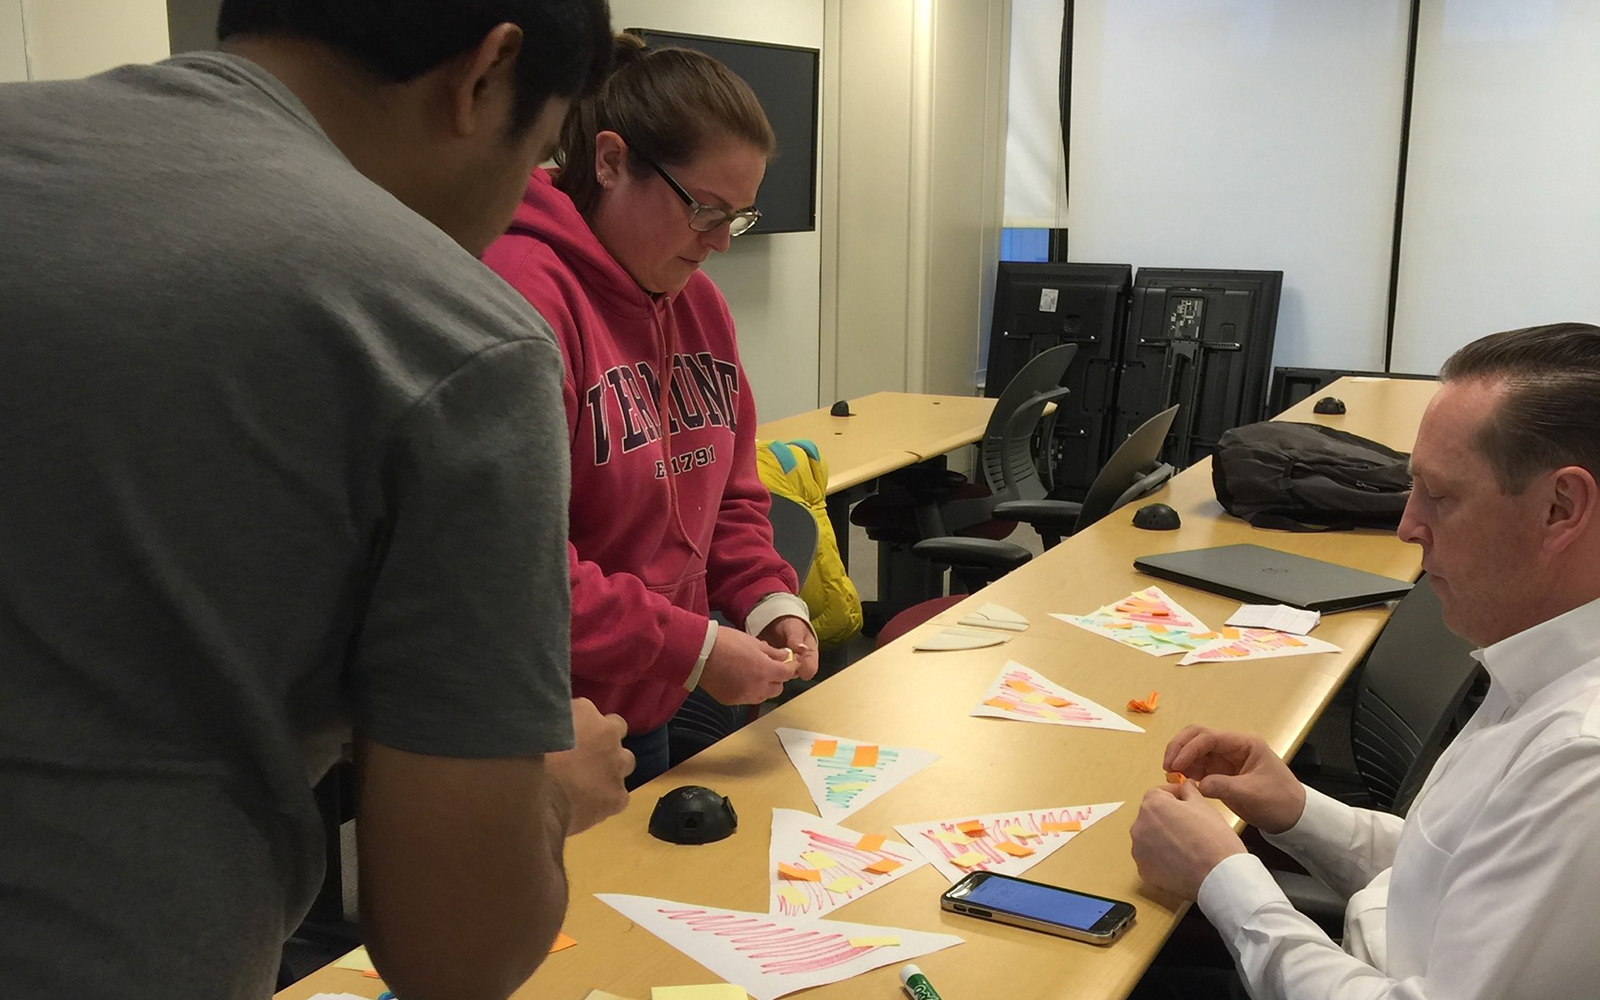 “Pizza Game” to learn Scrum for sprint backlog (in class practice) (Guanwei Tao/UConn School of Business)